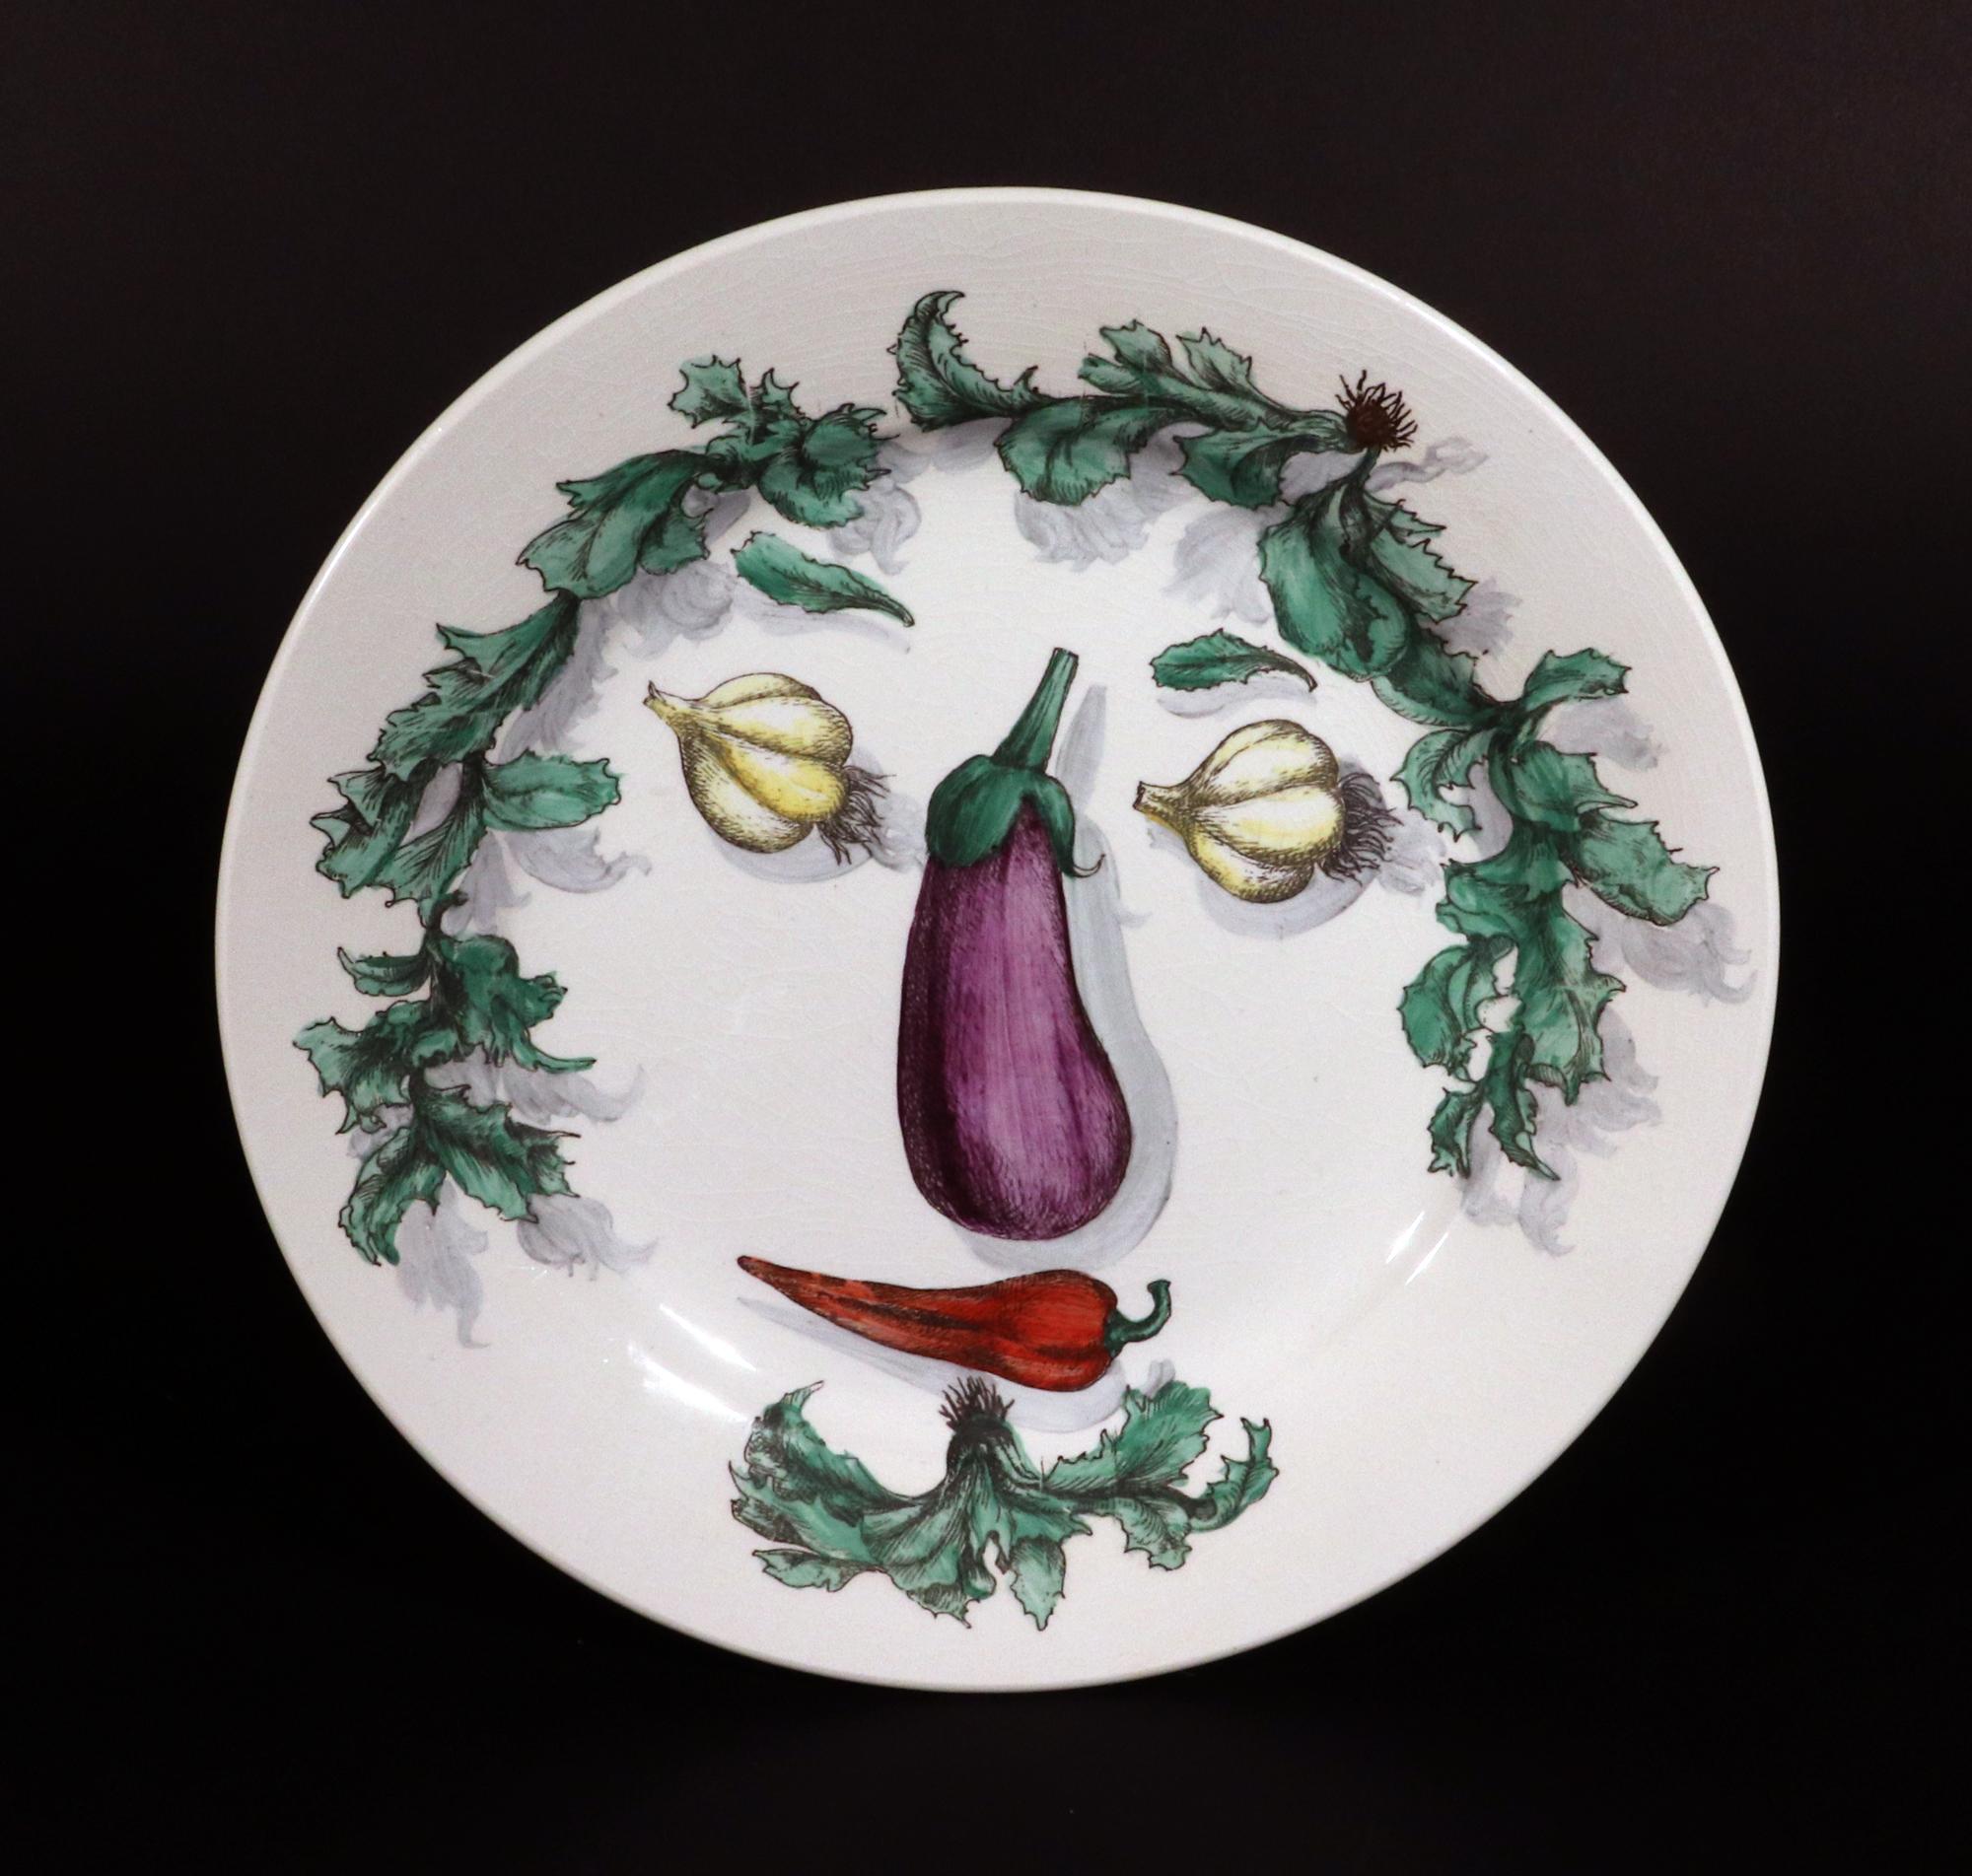 Piero Fornasetti Pottery Arcimboldesca-Motif Vegetable Face Plates In Good Condition For Sale In Downingtown, PA